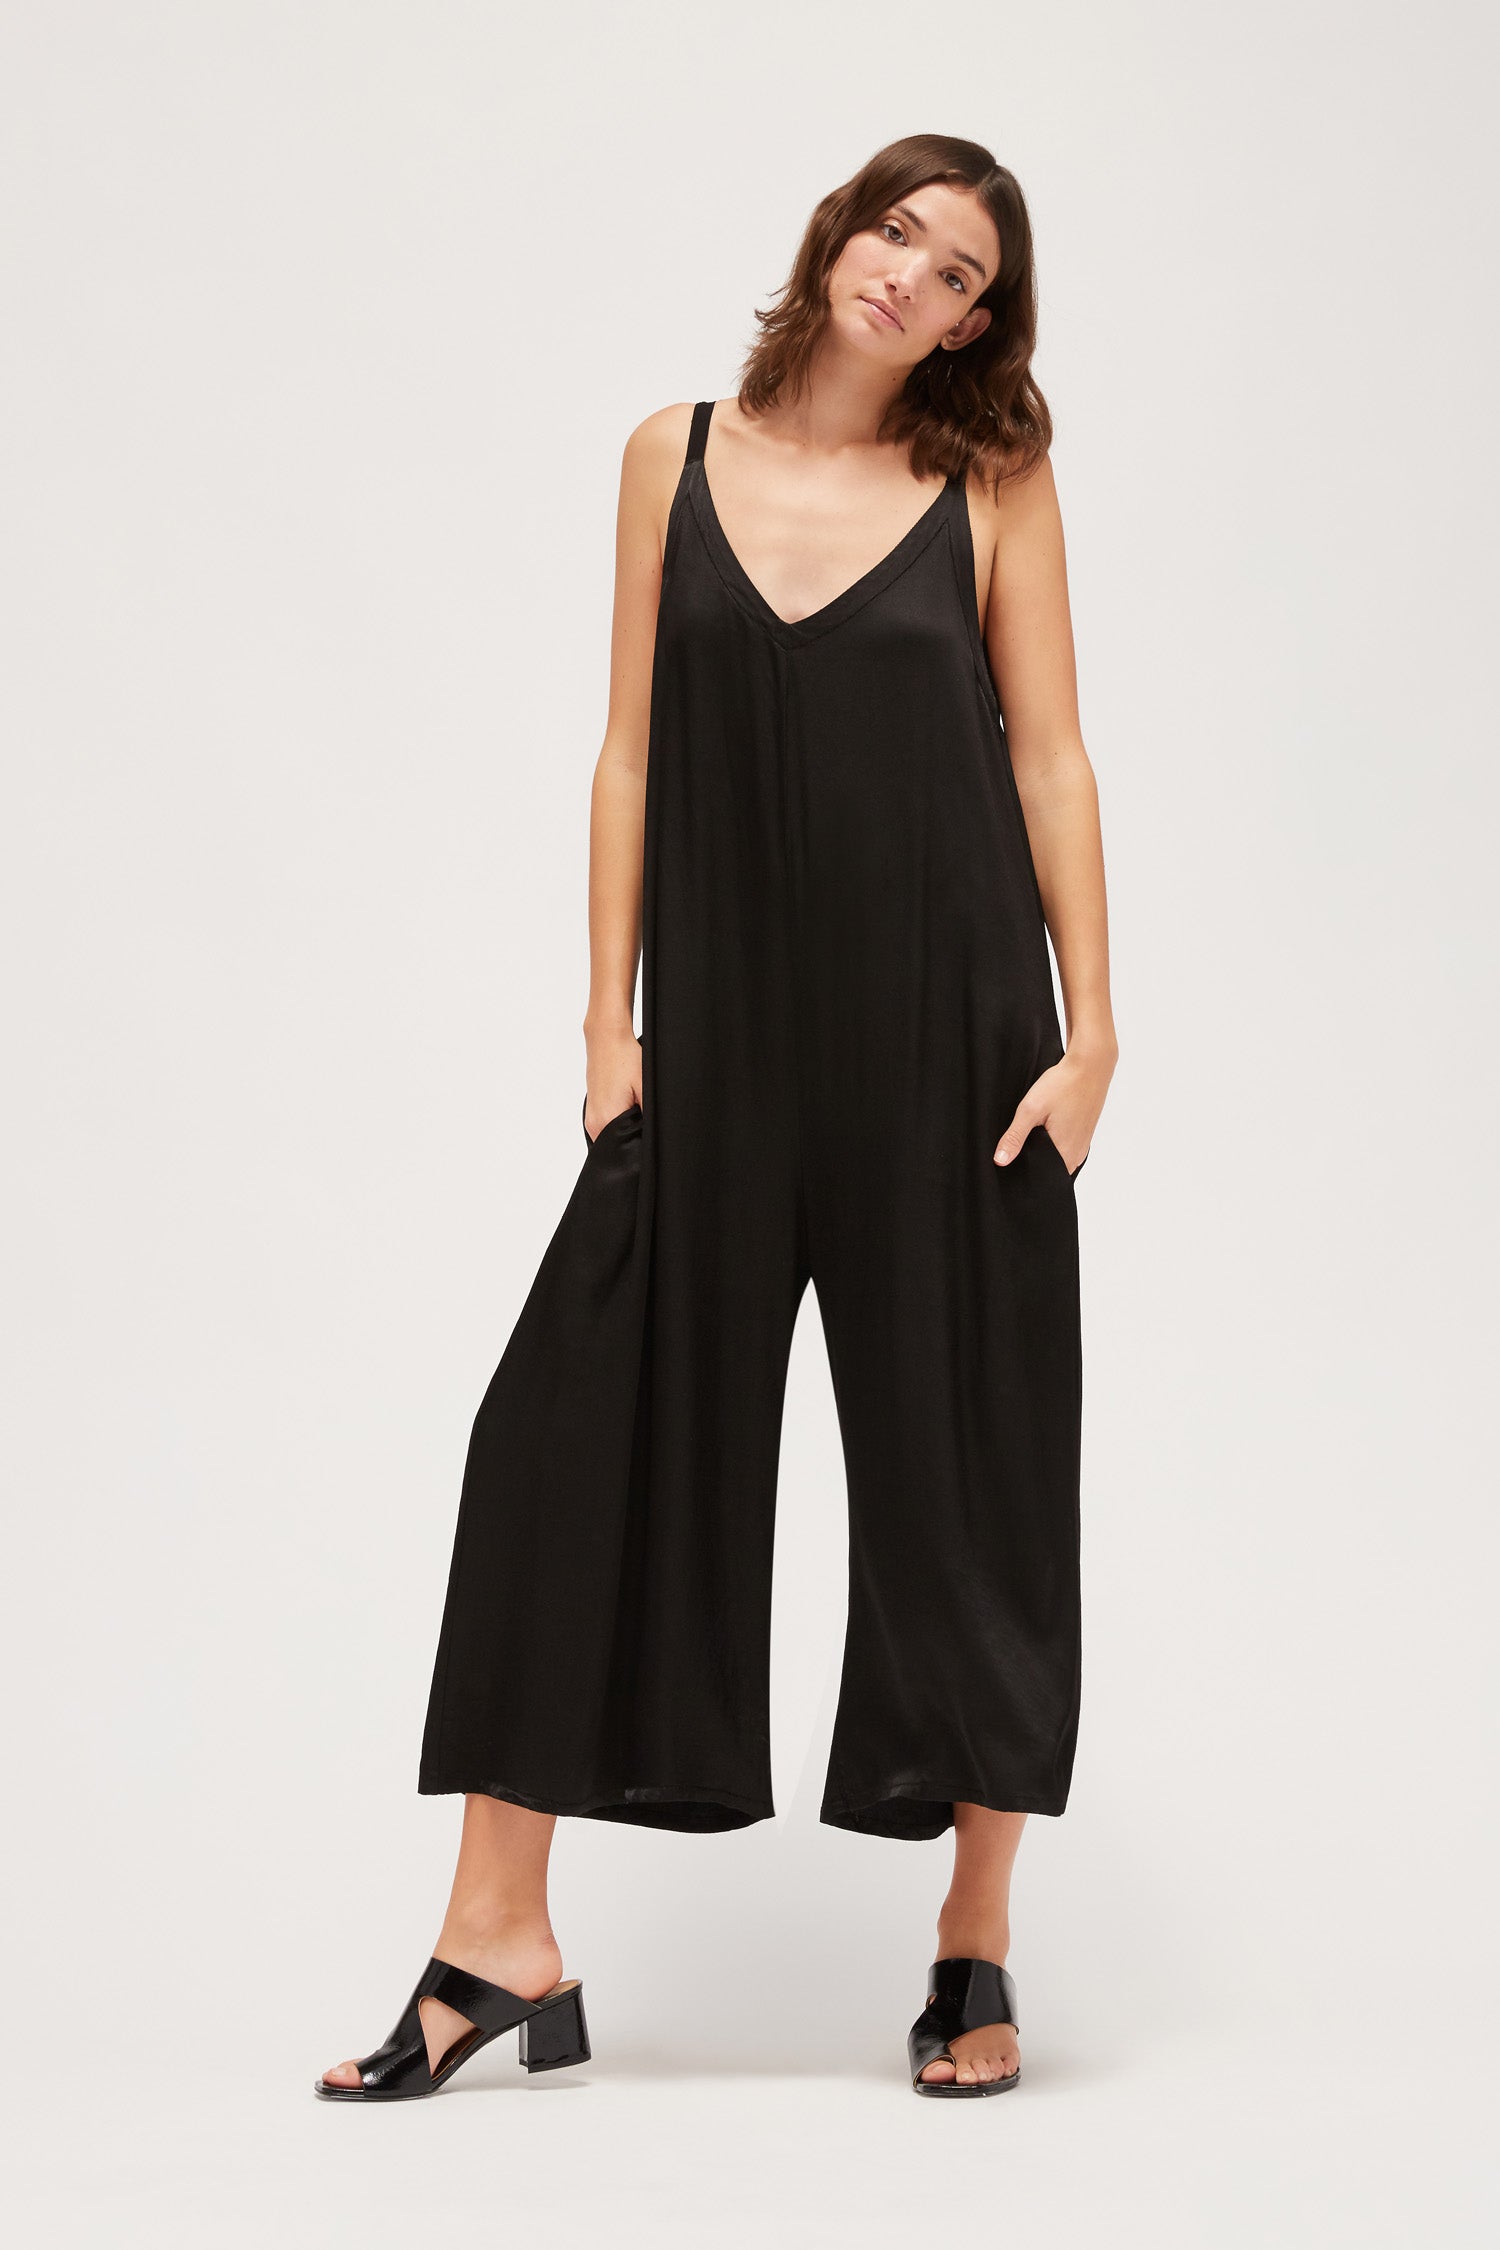 jumpsuits for wedding guest ireland